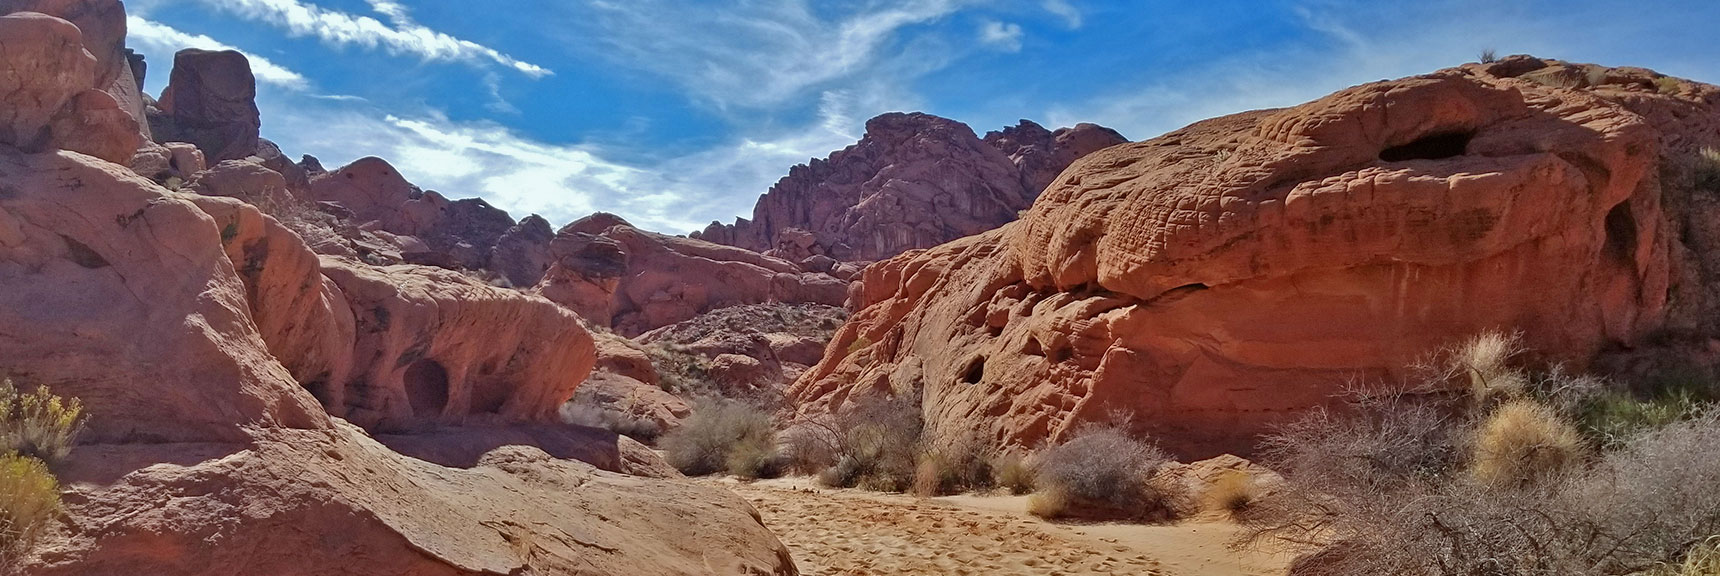 Approaching a Turn-Around Point on on Natural Arches Trail, Valley of Fire State Park, Nevada